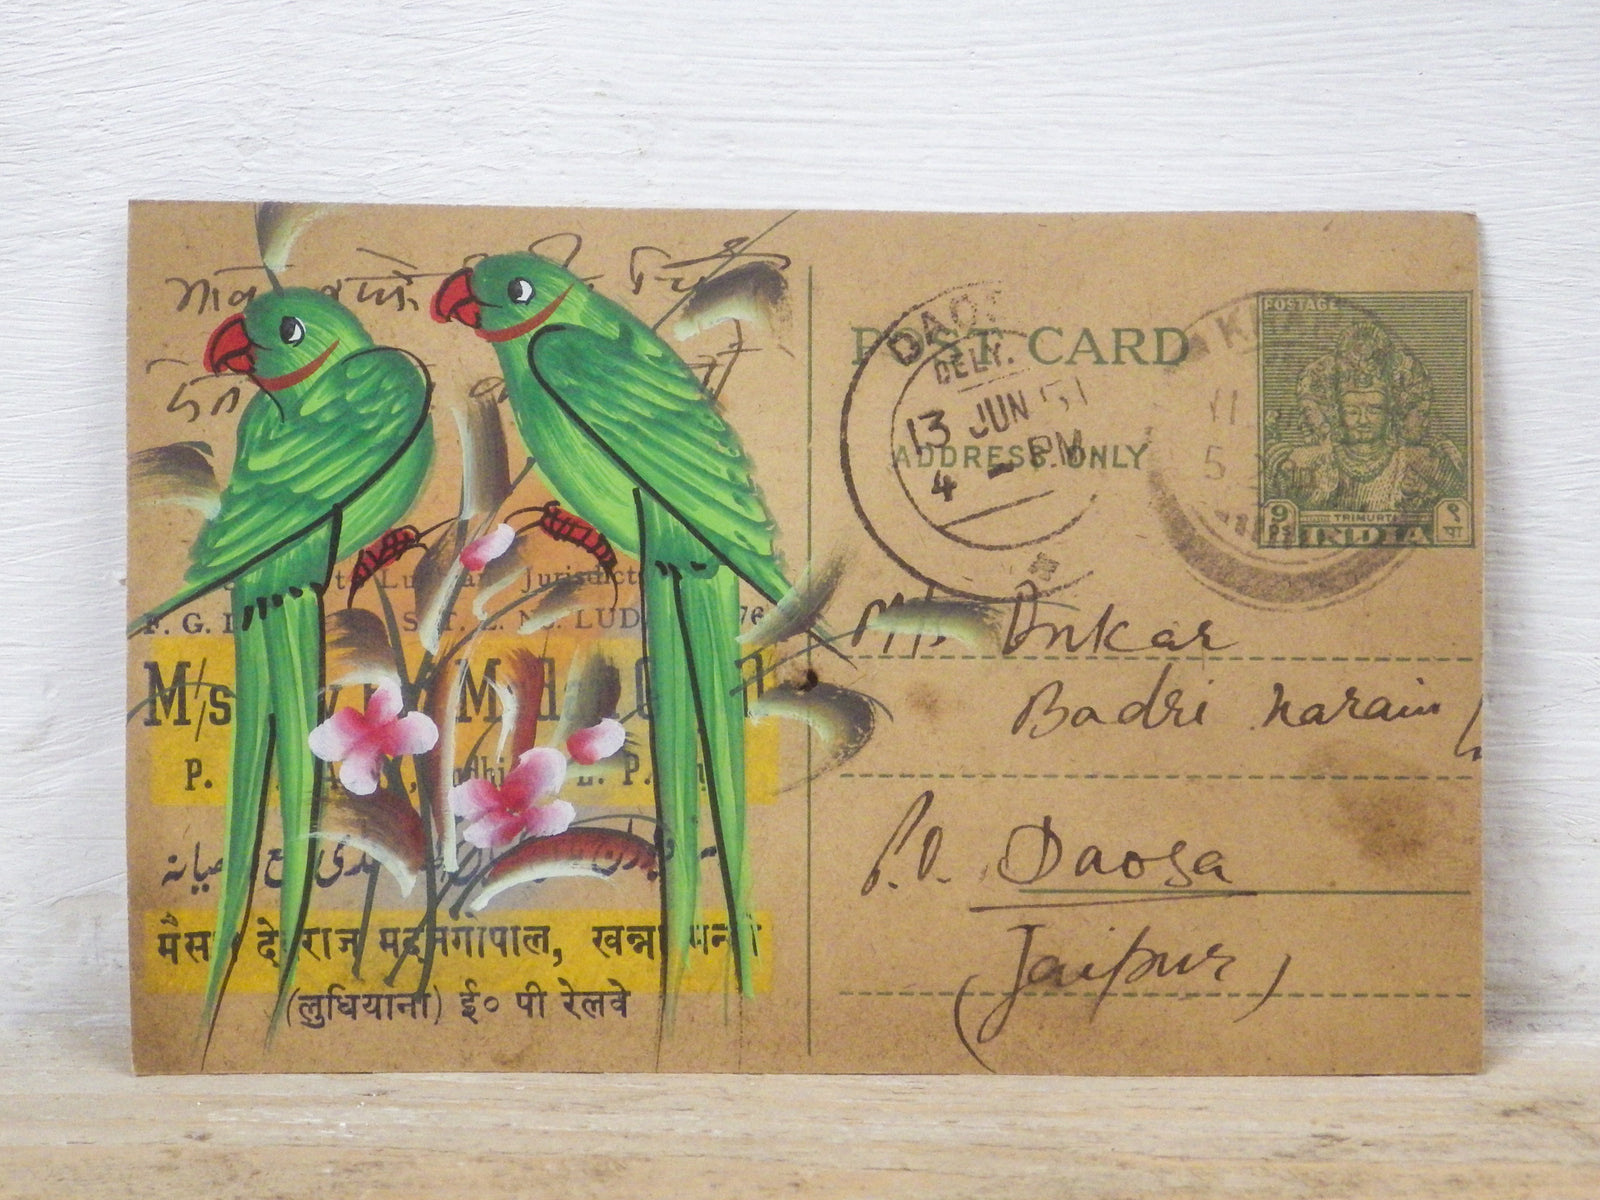 MILL-1573/6 Hand Painted Old Post Card C18